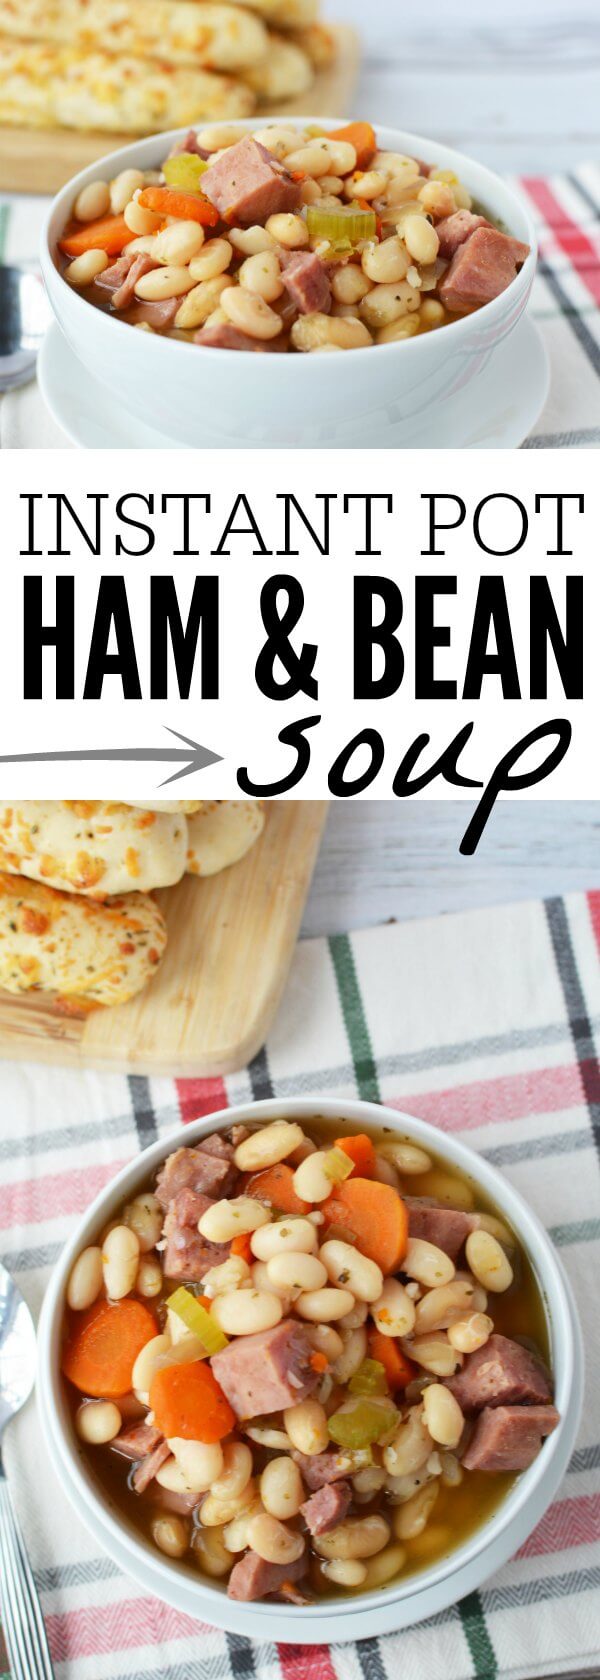 Ham and Bean Soup Instant Pot Recipe - Quick & Easy in the Instant Pot